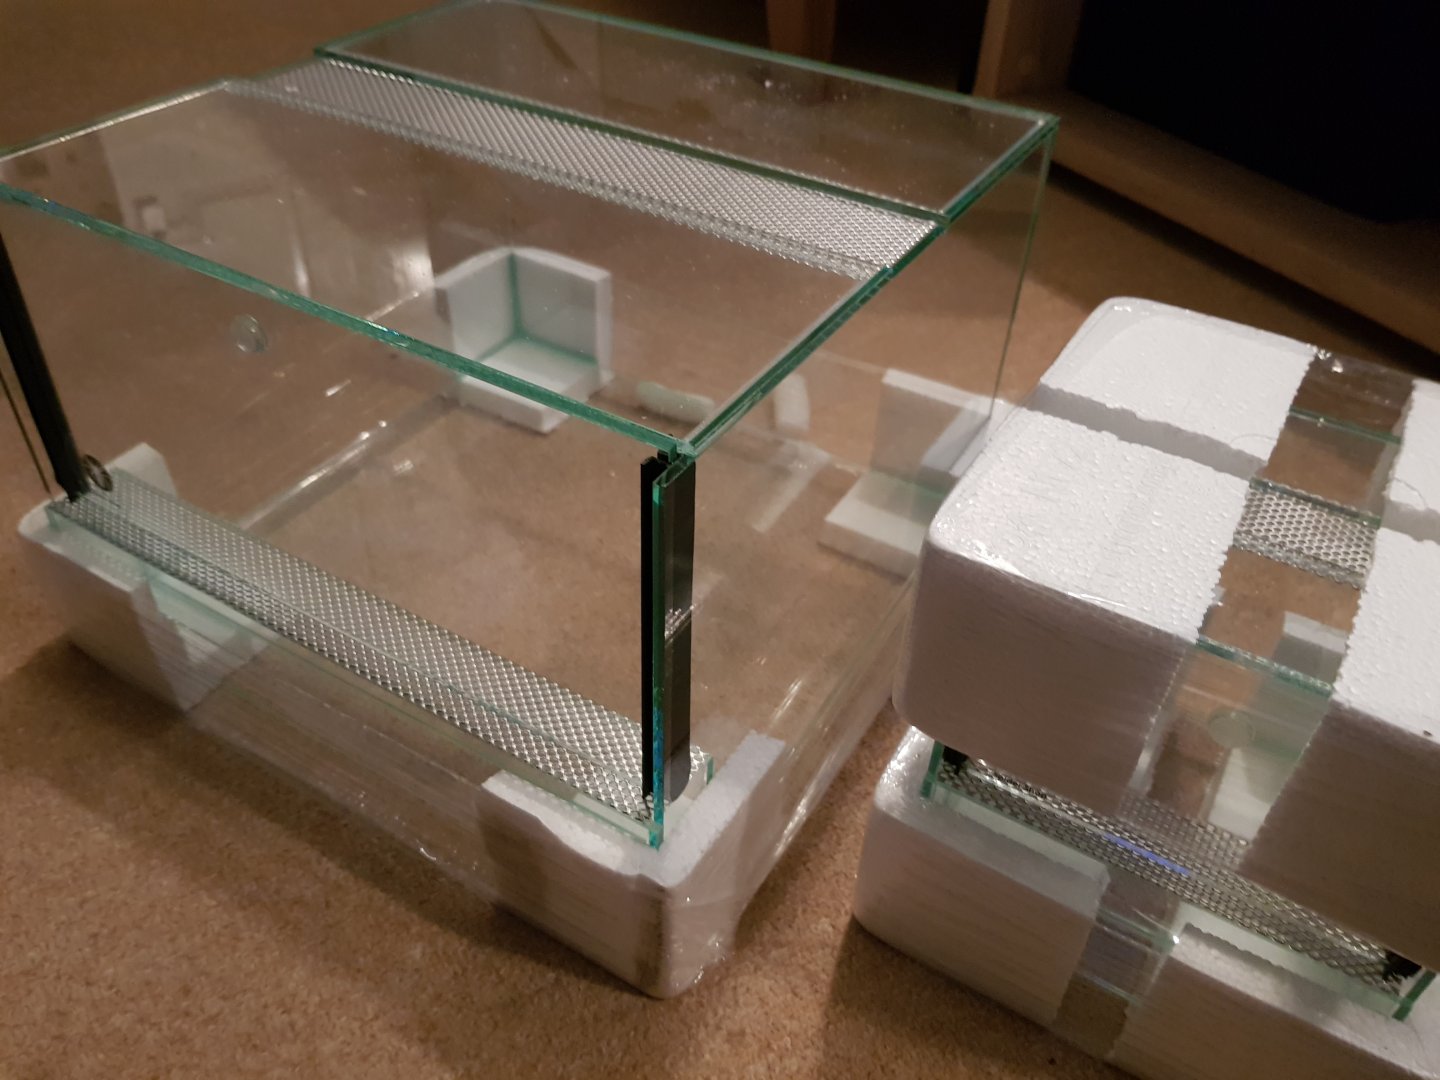 New enclosures from the spider shop UK